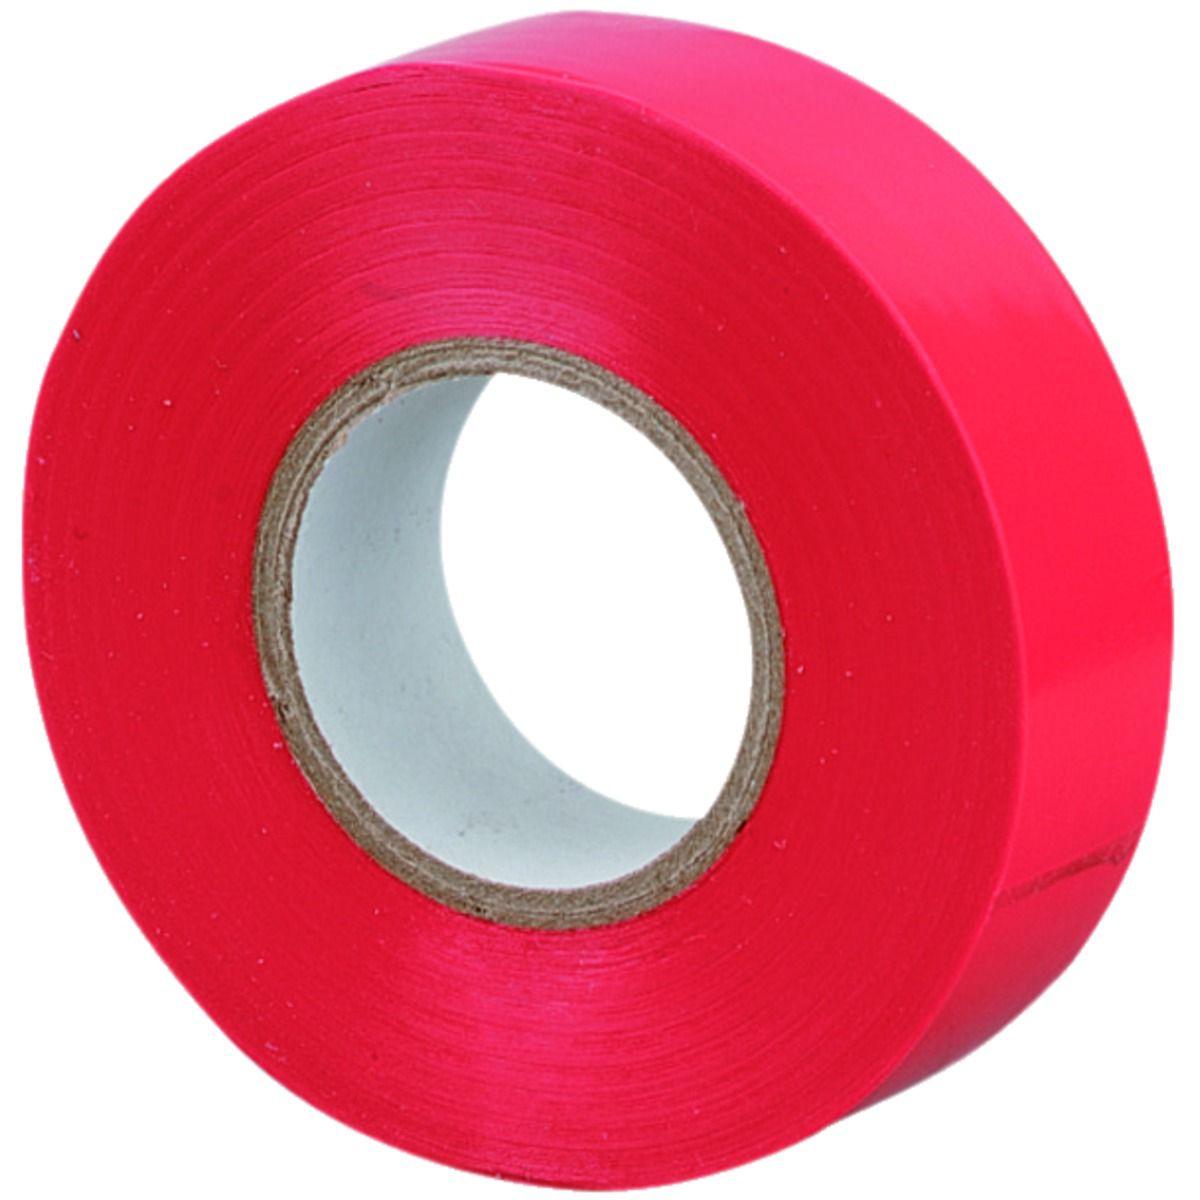 Image of Deta Red PVC Electrical Insulation Tape - 20m x 19mm